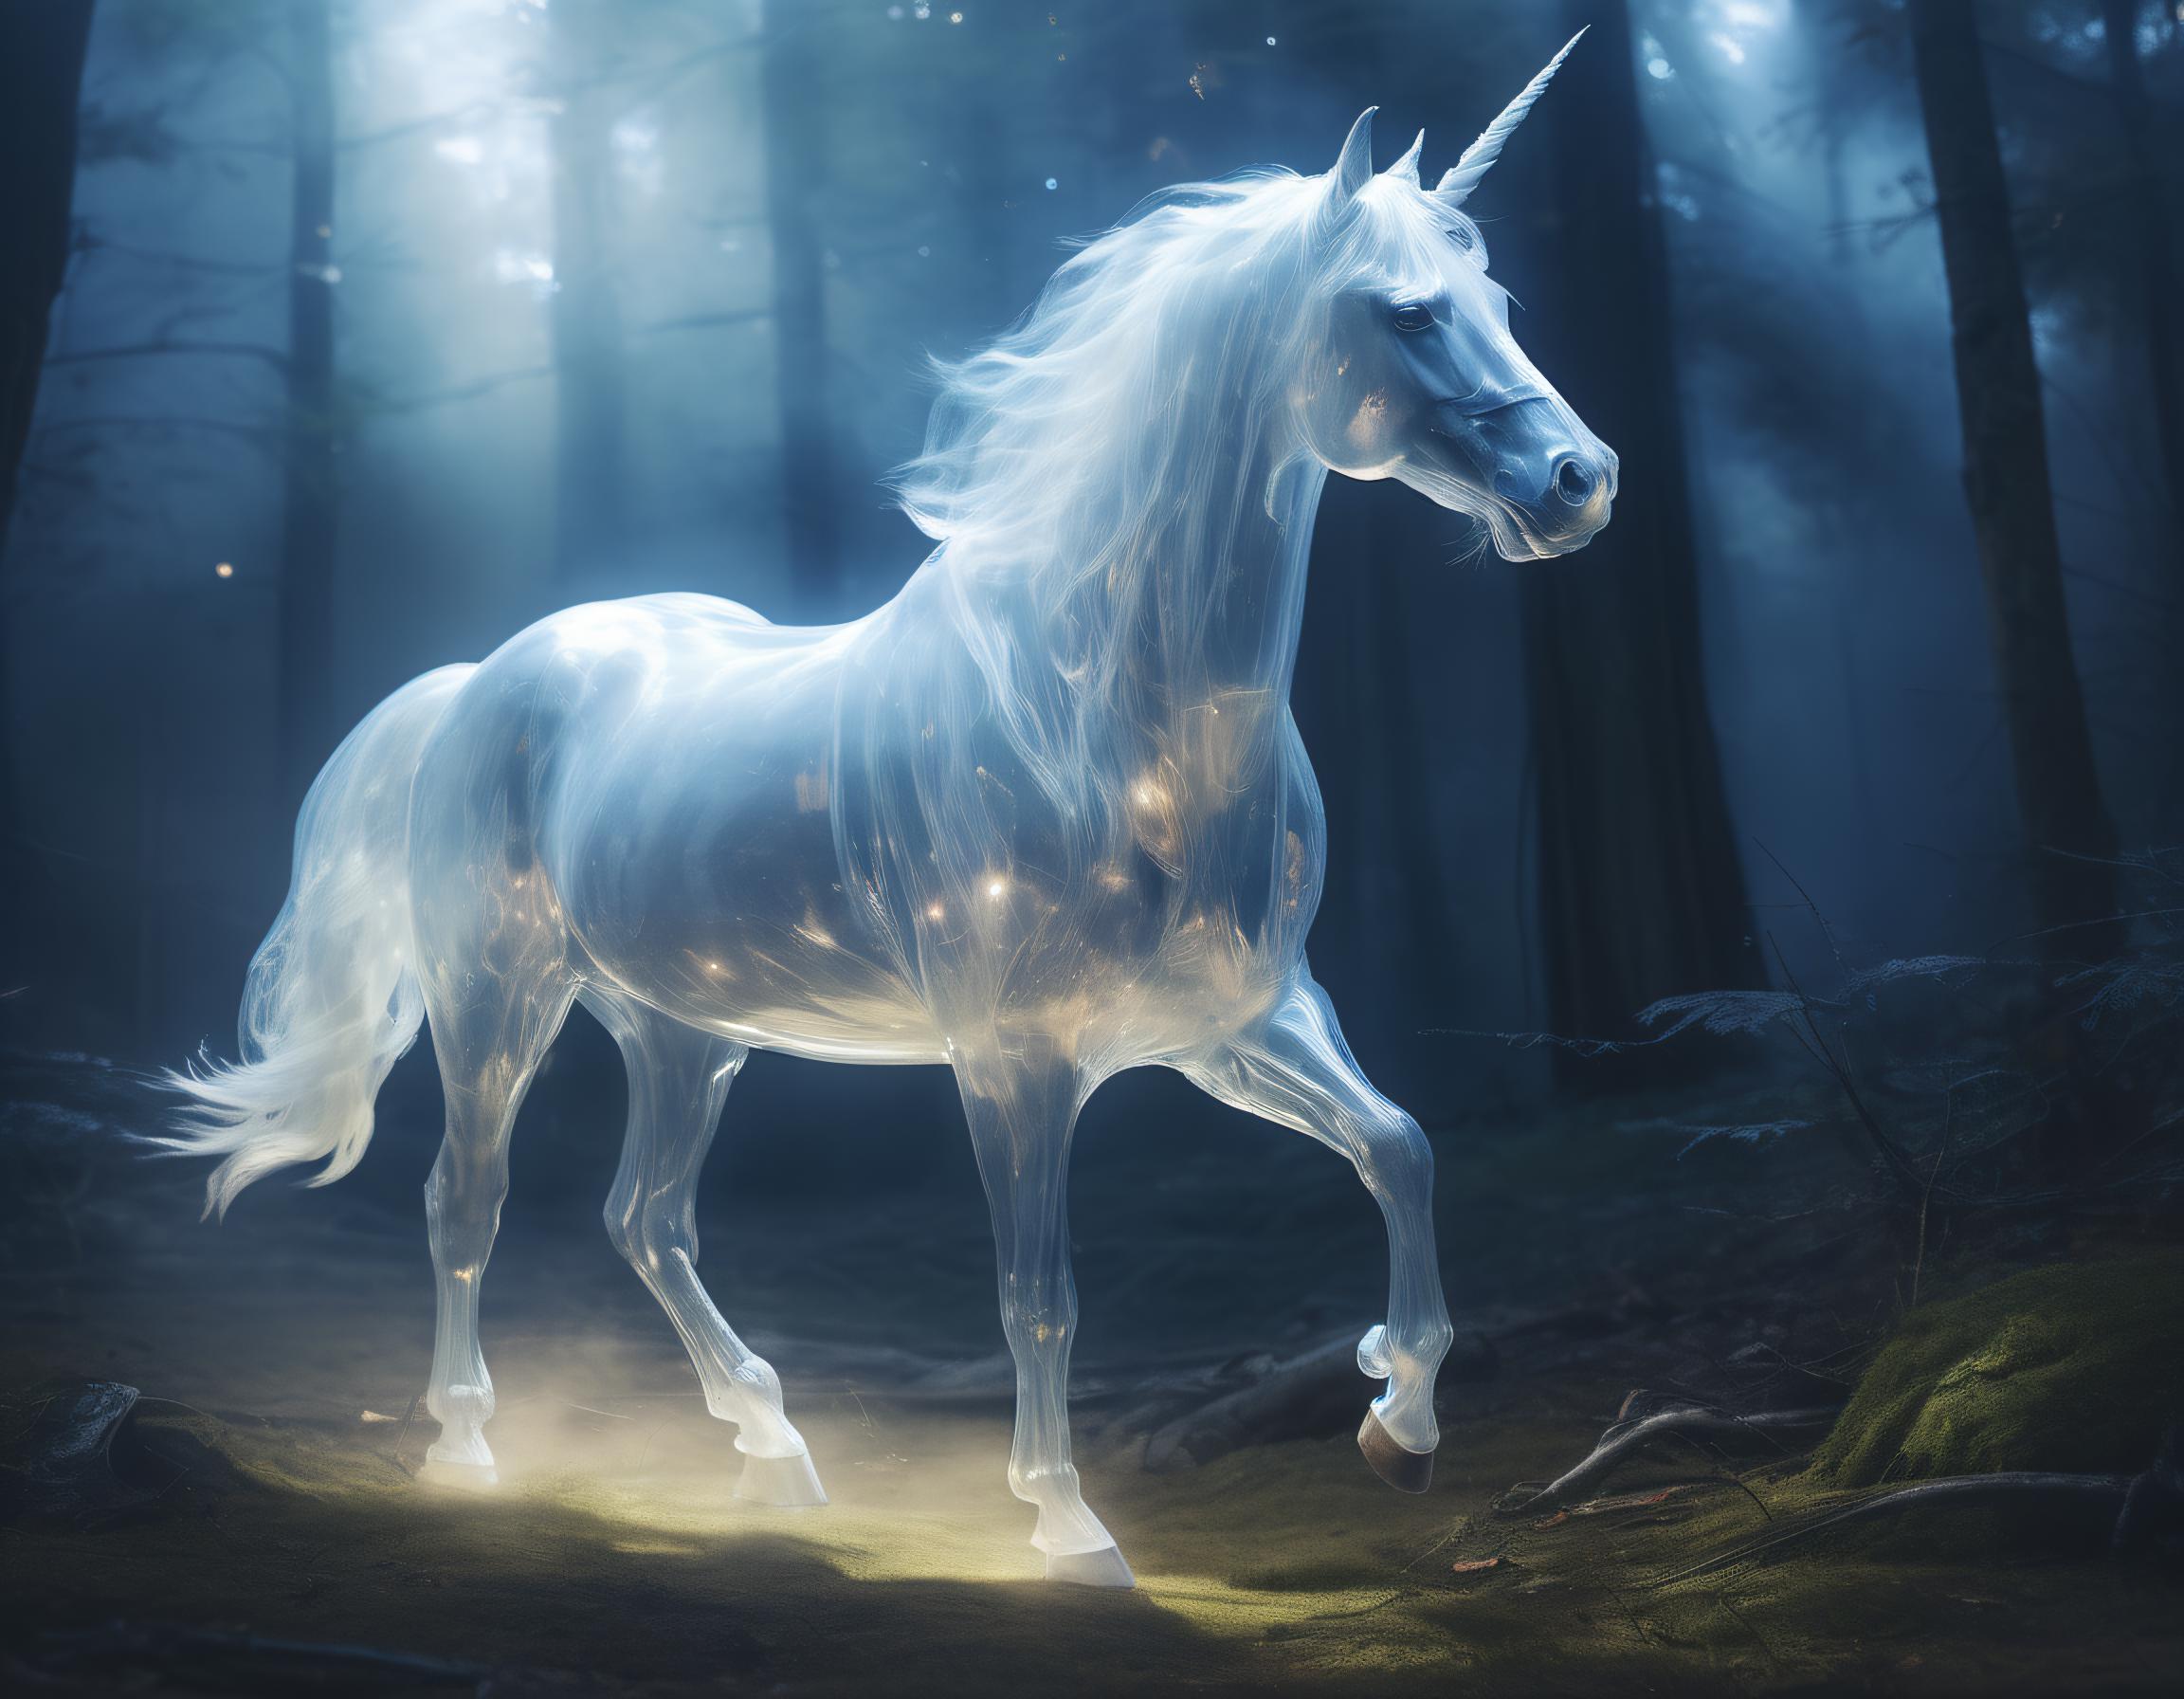 A White Unicorn with a Sparkly Body in a Forest